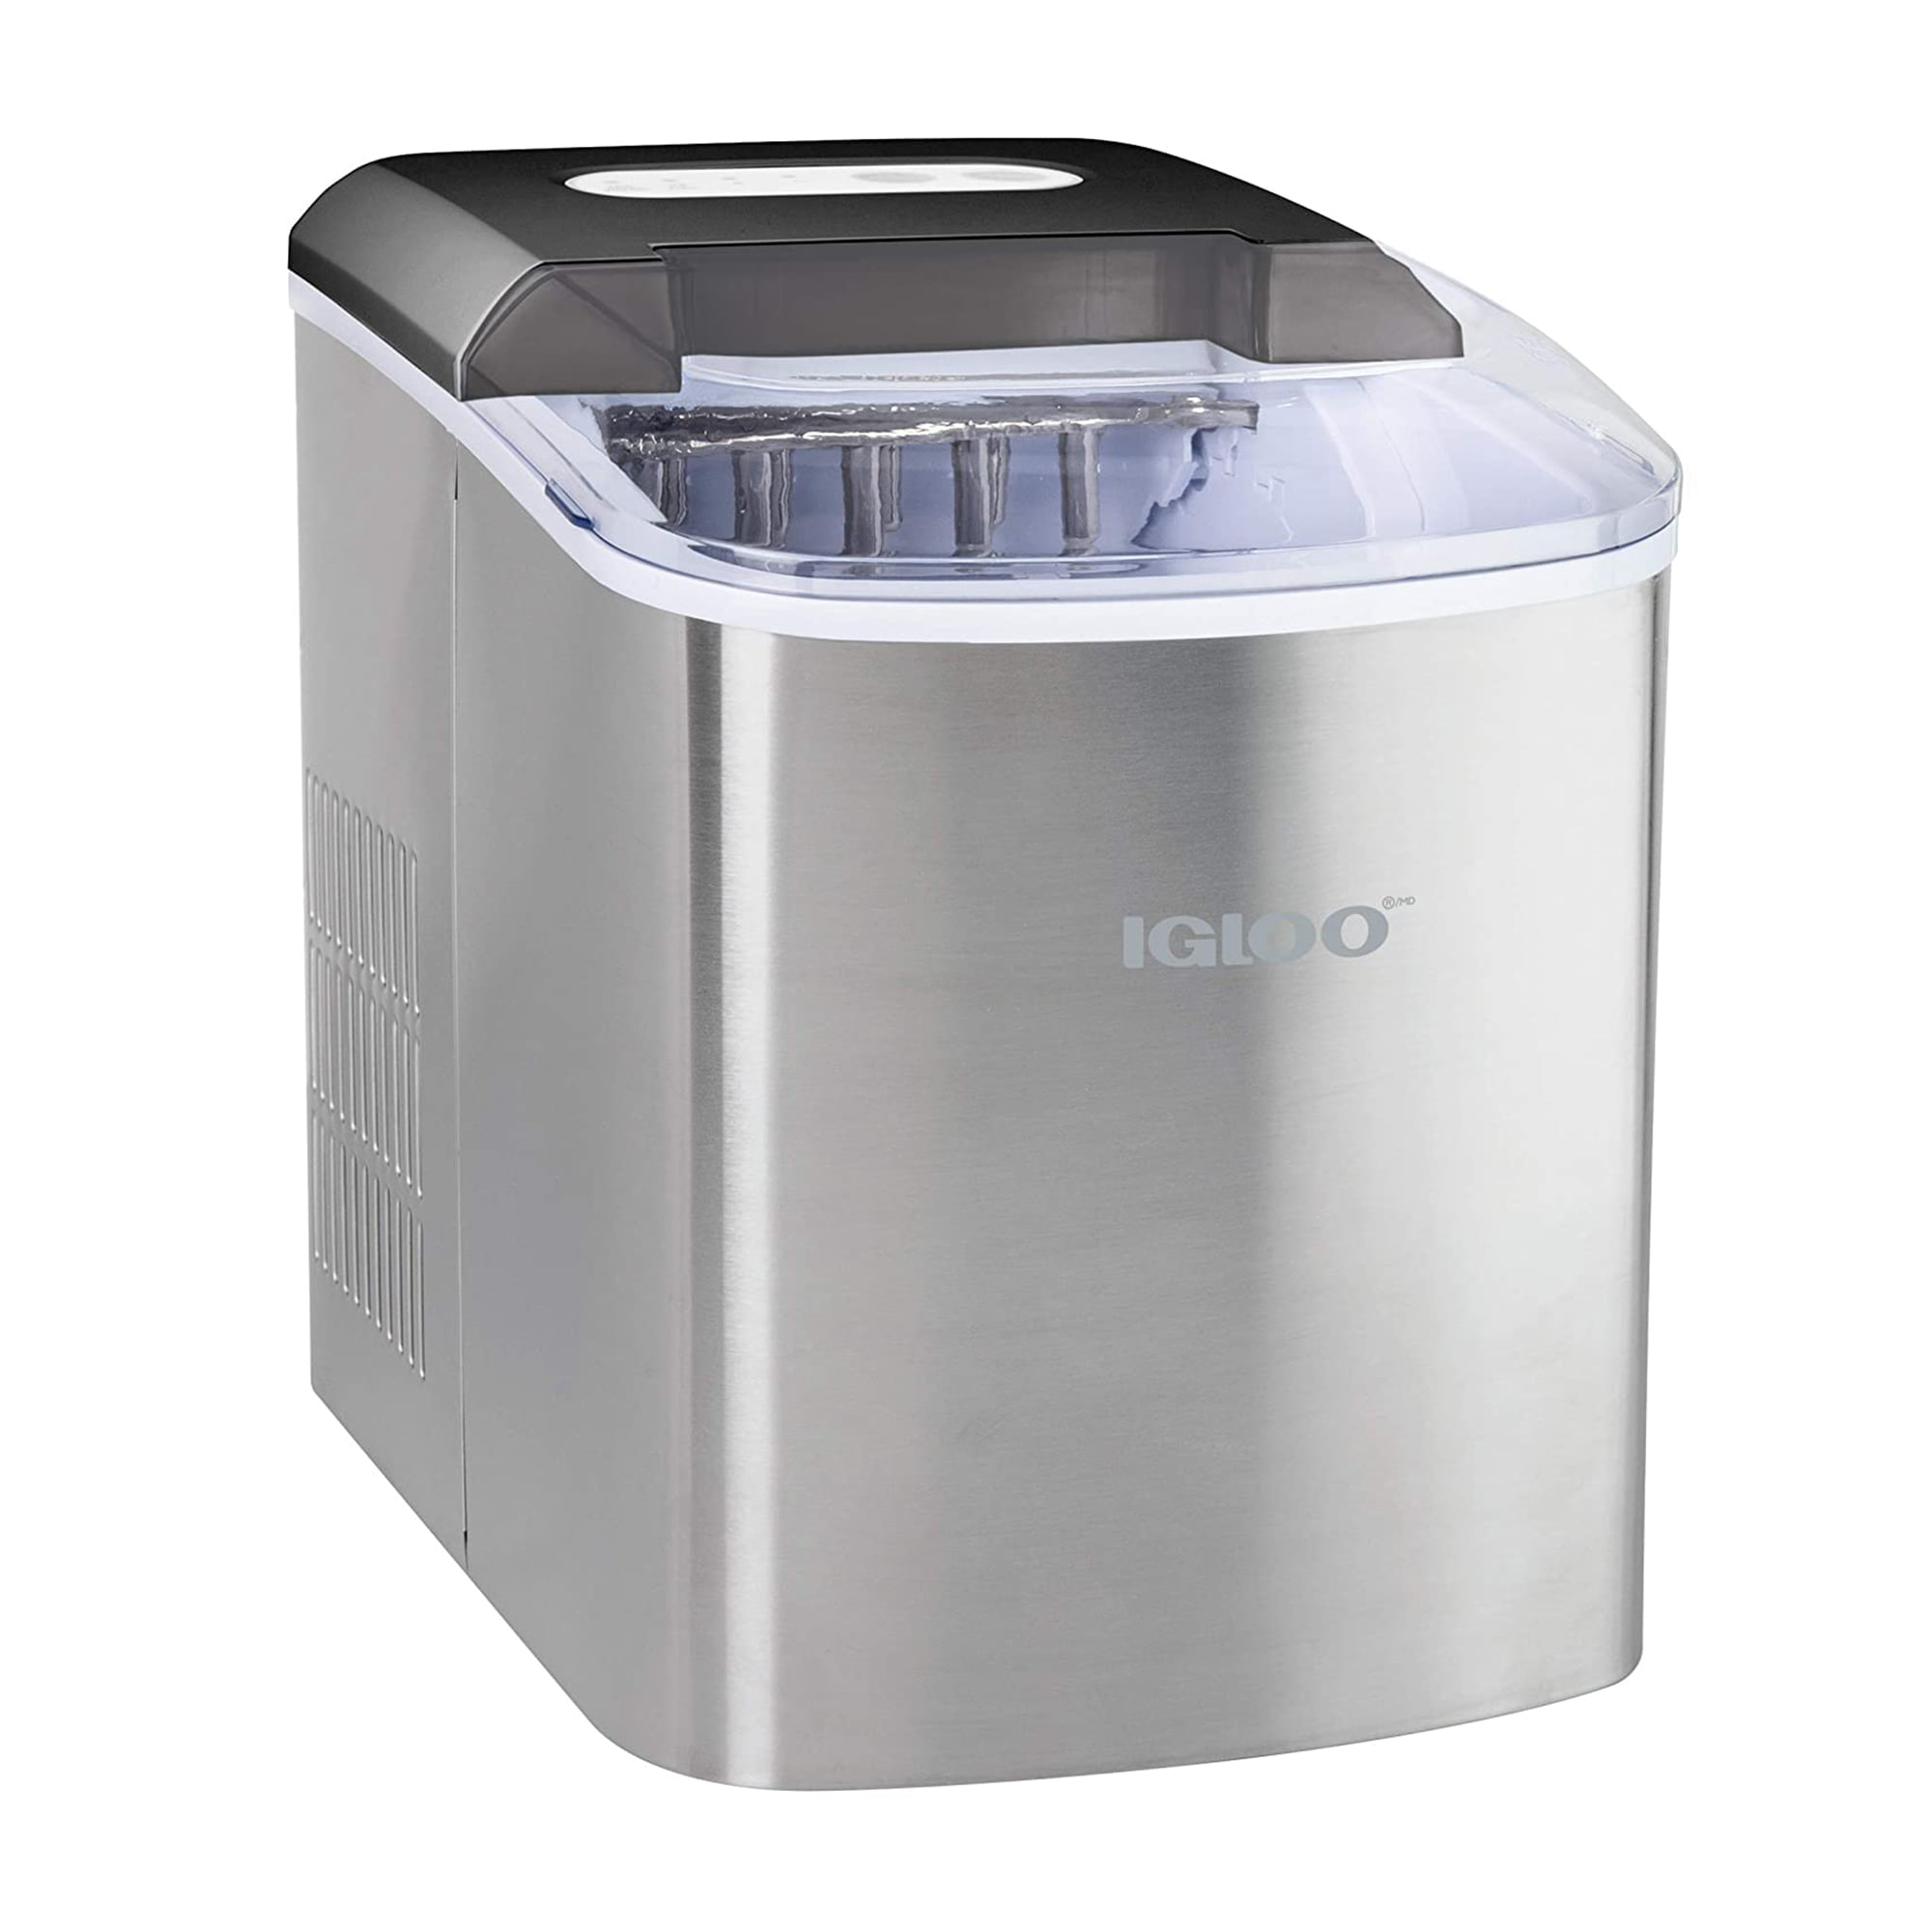 Mixed Drinks .Limited Edition Aqua with Ice Scoop and Basket Igloo ICEB26AQ Automatic Portable Electric Countertop Ice Maker Machine Perfect for Water Bottles 9 Ice Cubes Ready in 7 Minutes 